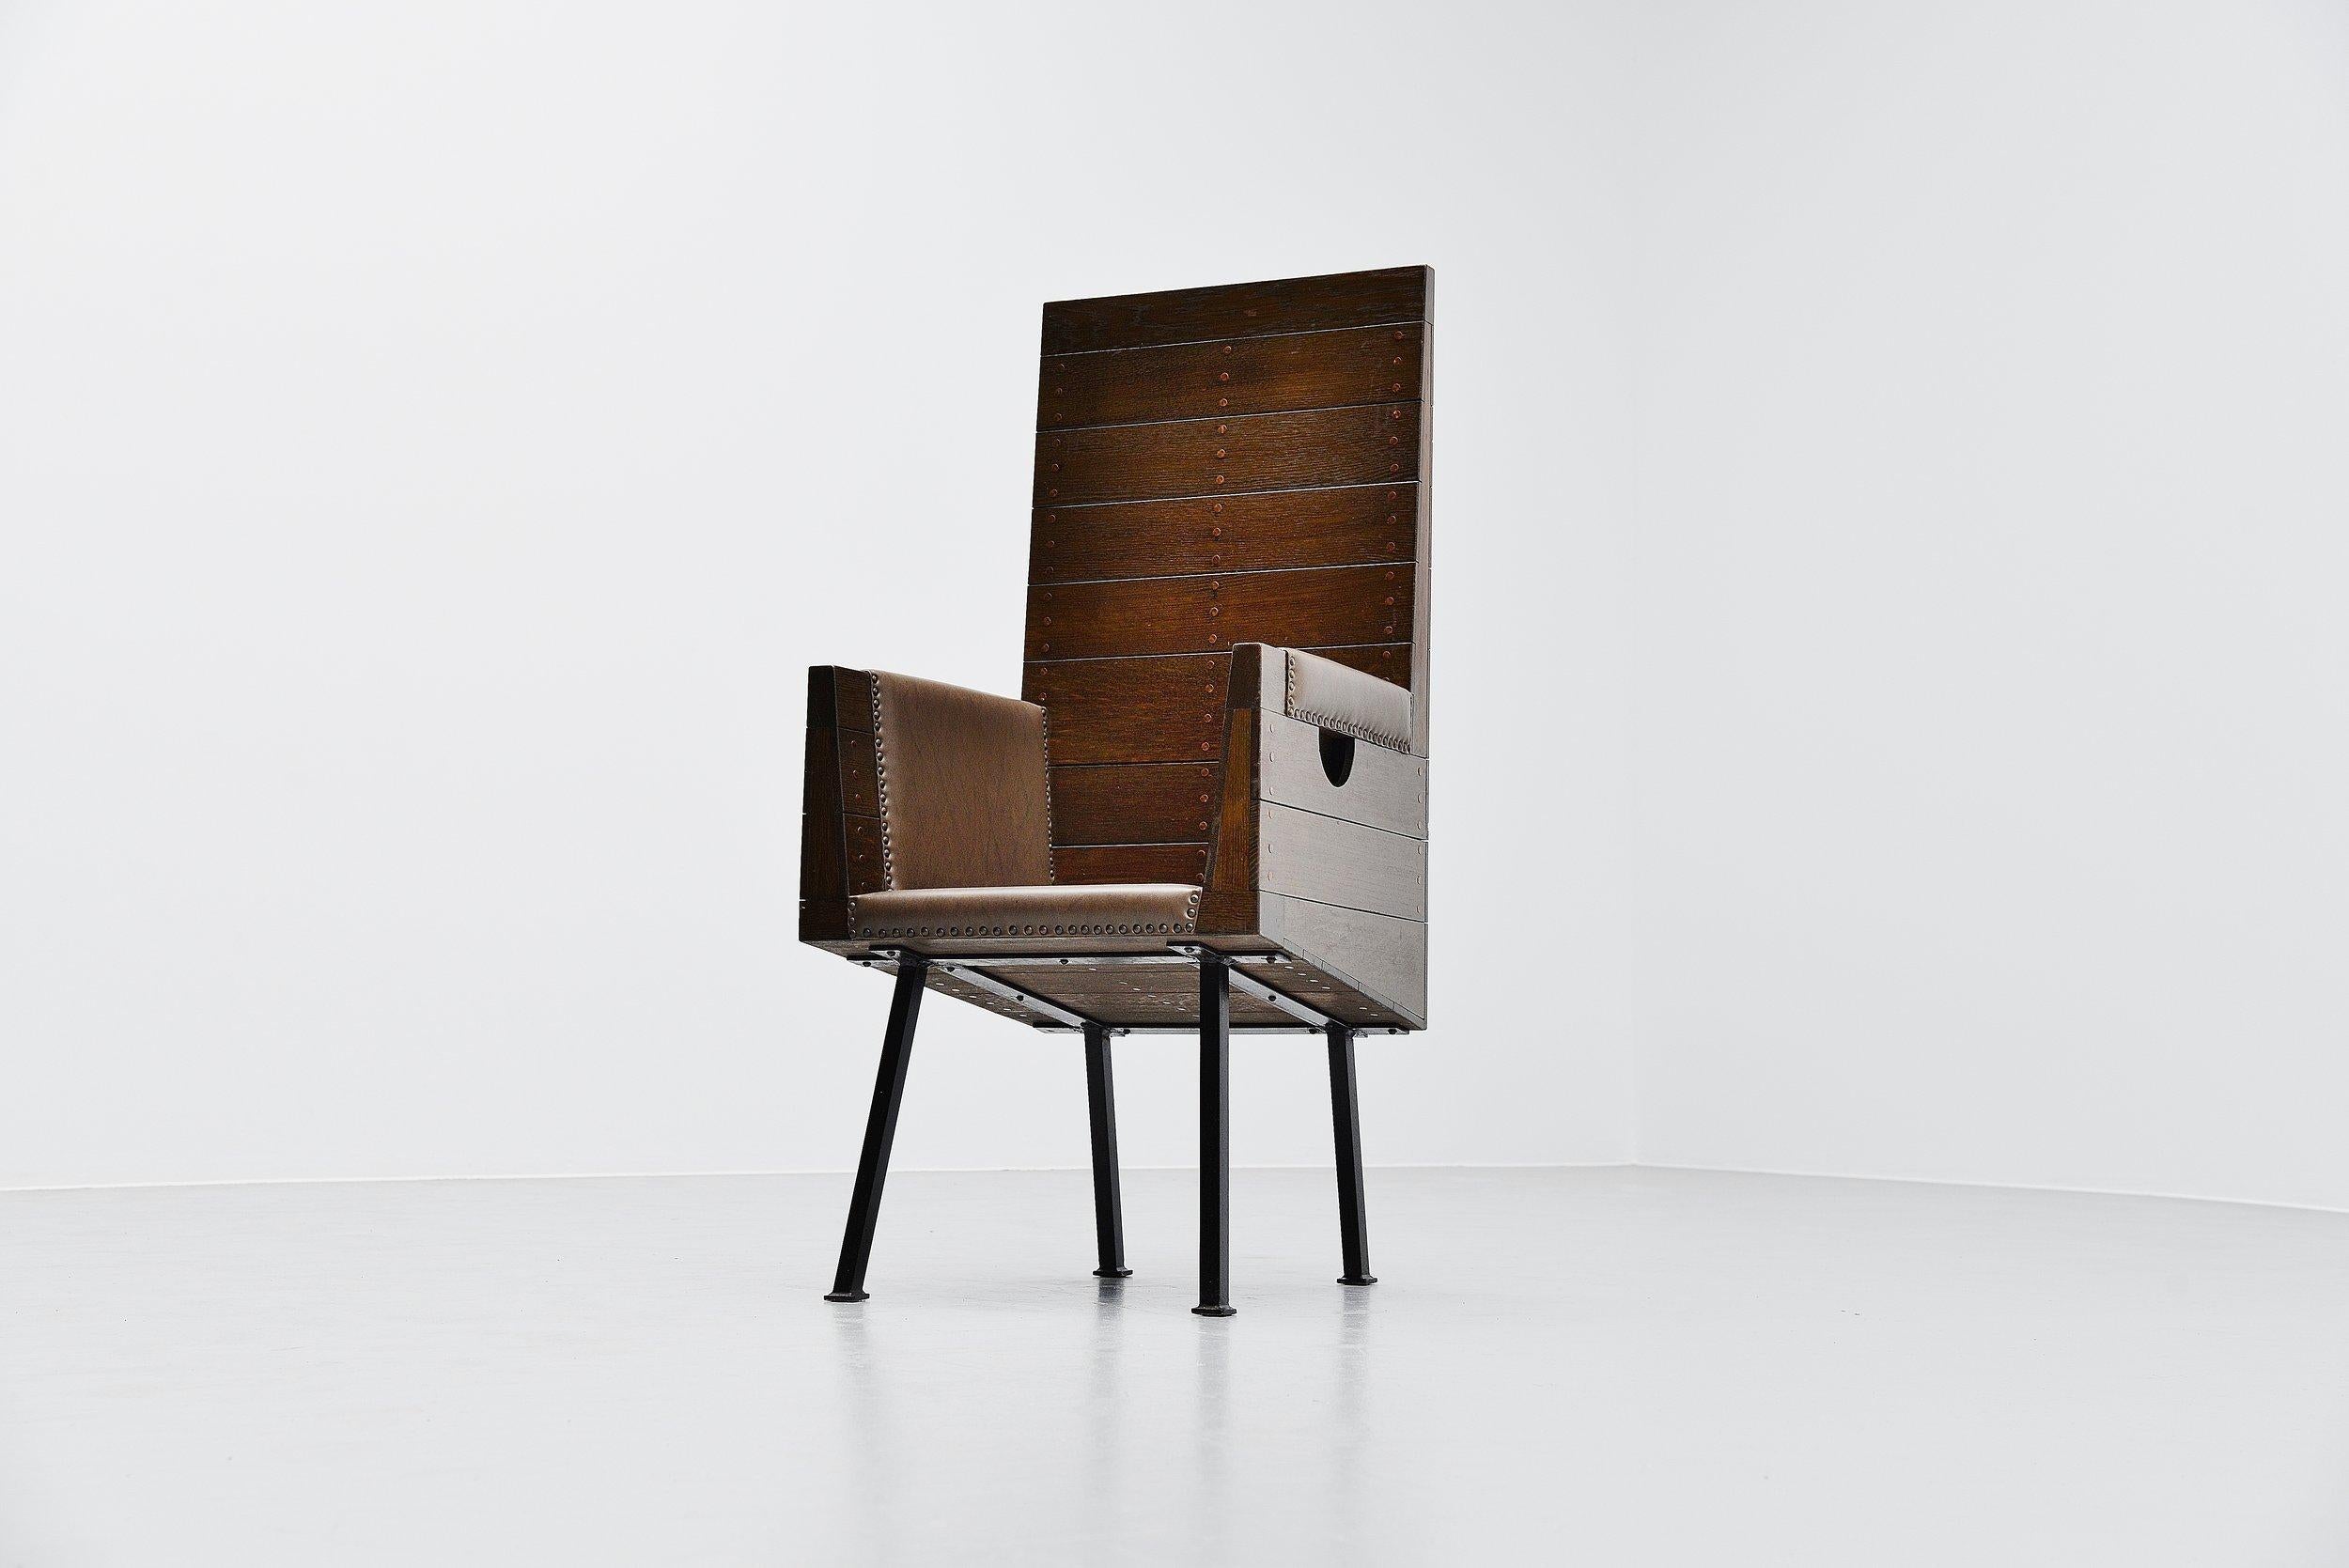 Mid-20th Century Dom Hans van der Laan High Chair for Town Hall Budel, 1966